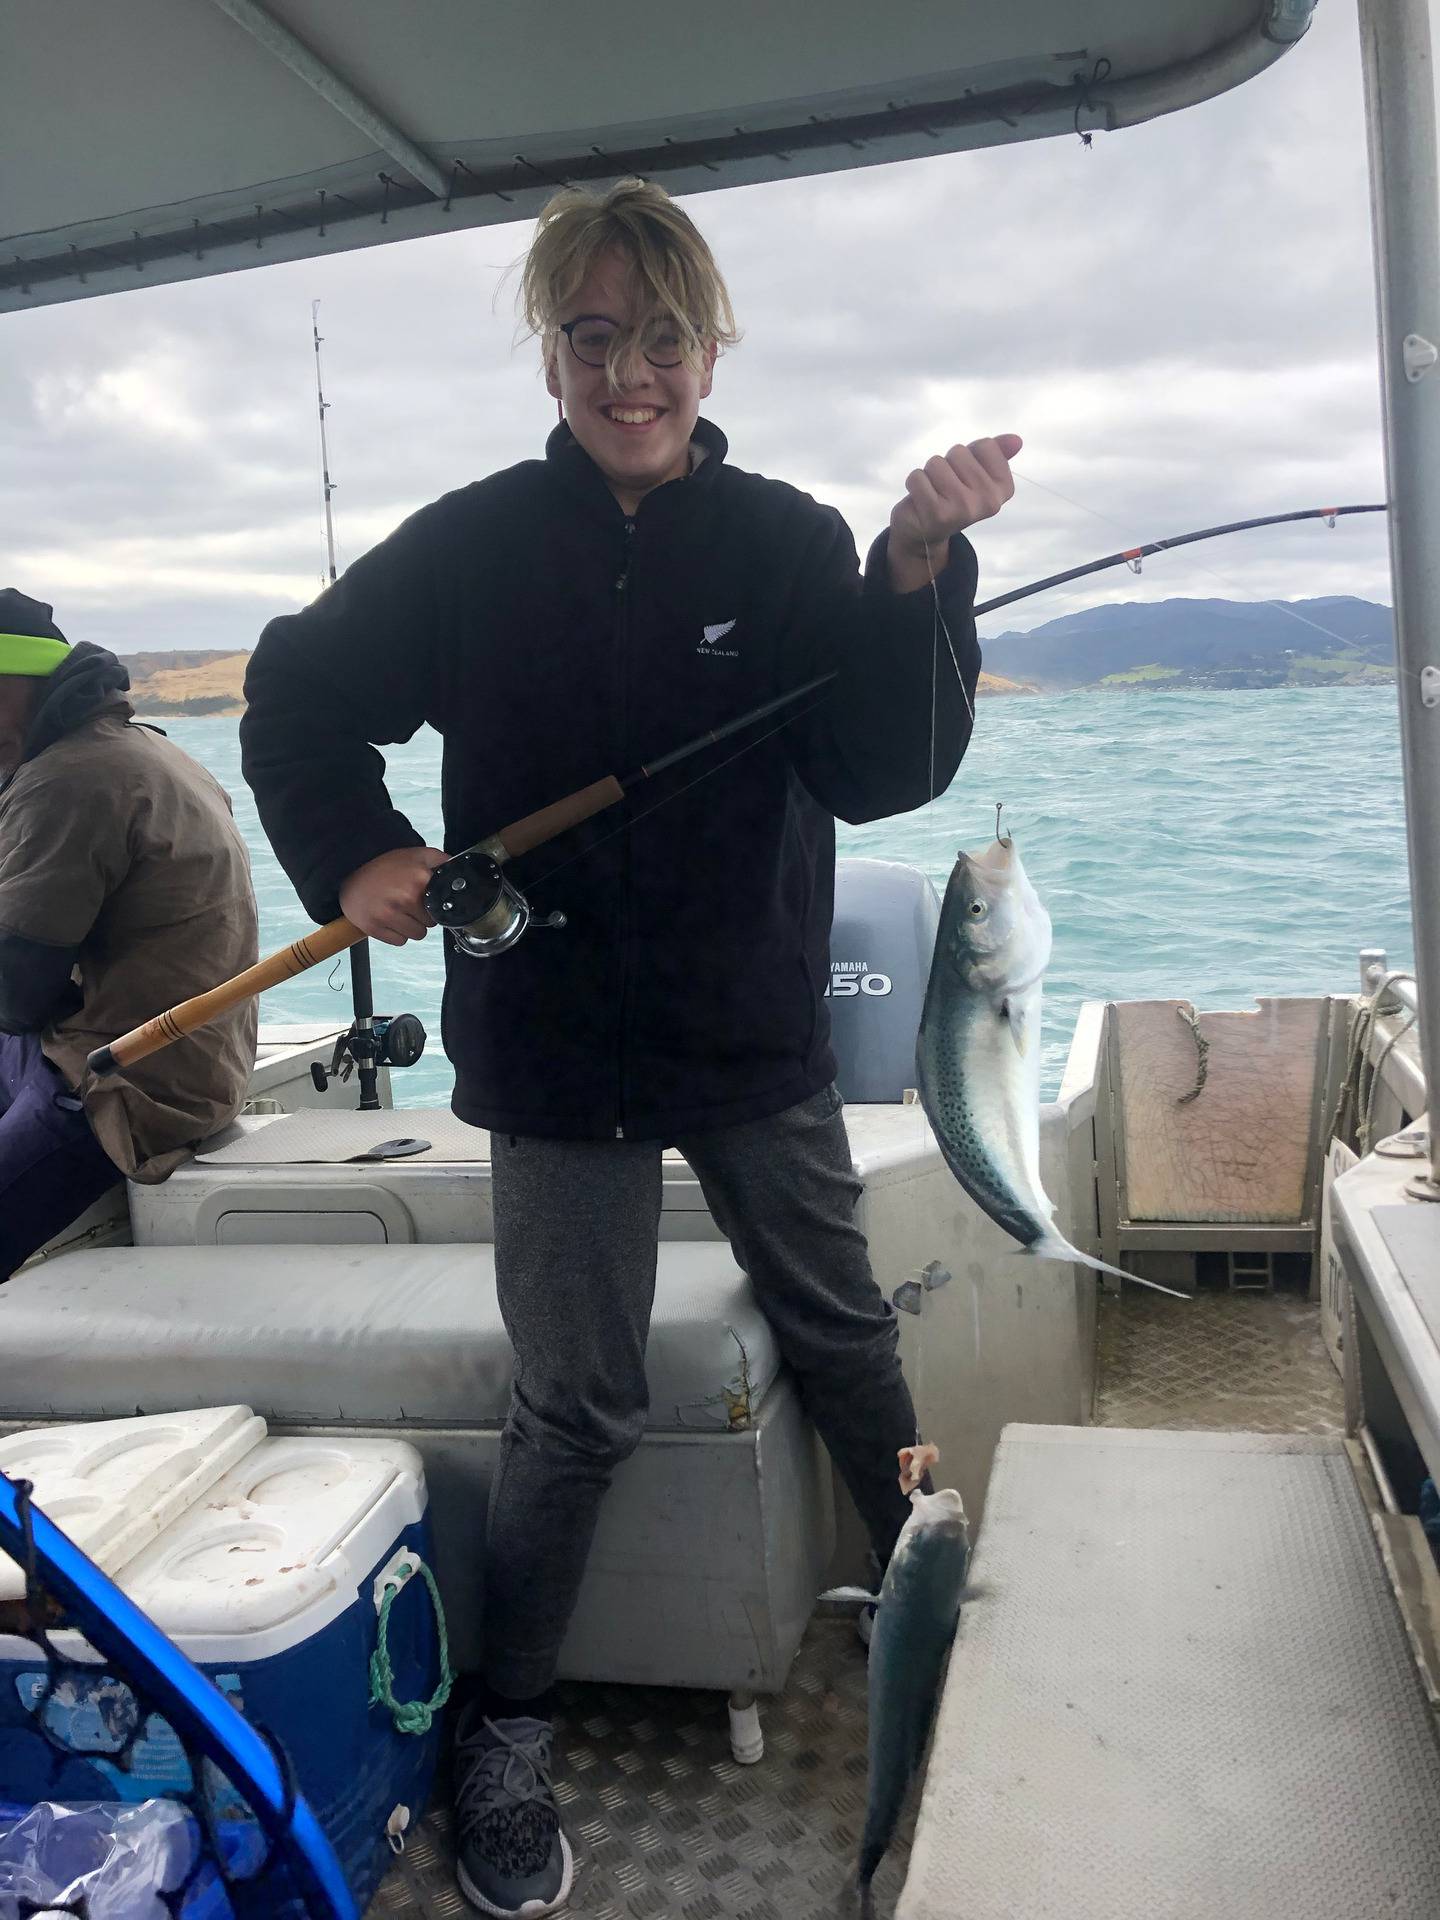 Dylan fishing in New Zealand. Photo: Supplied